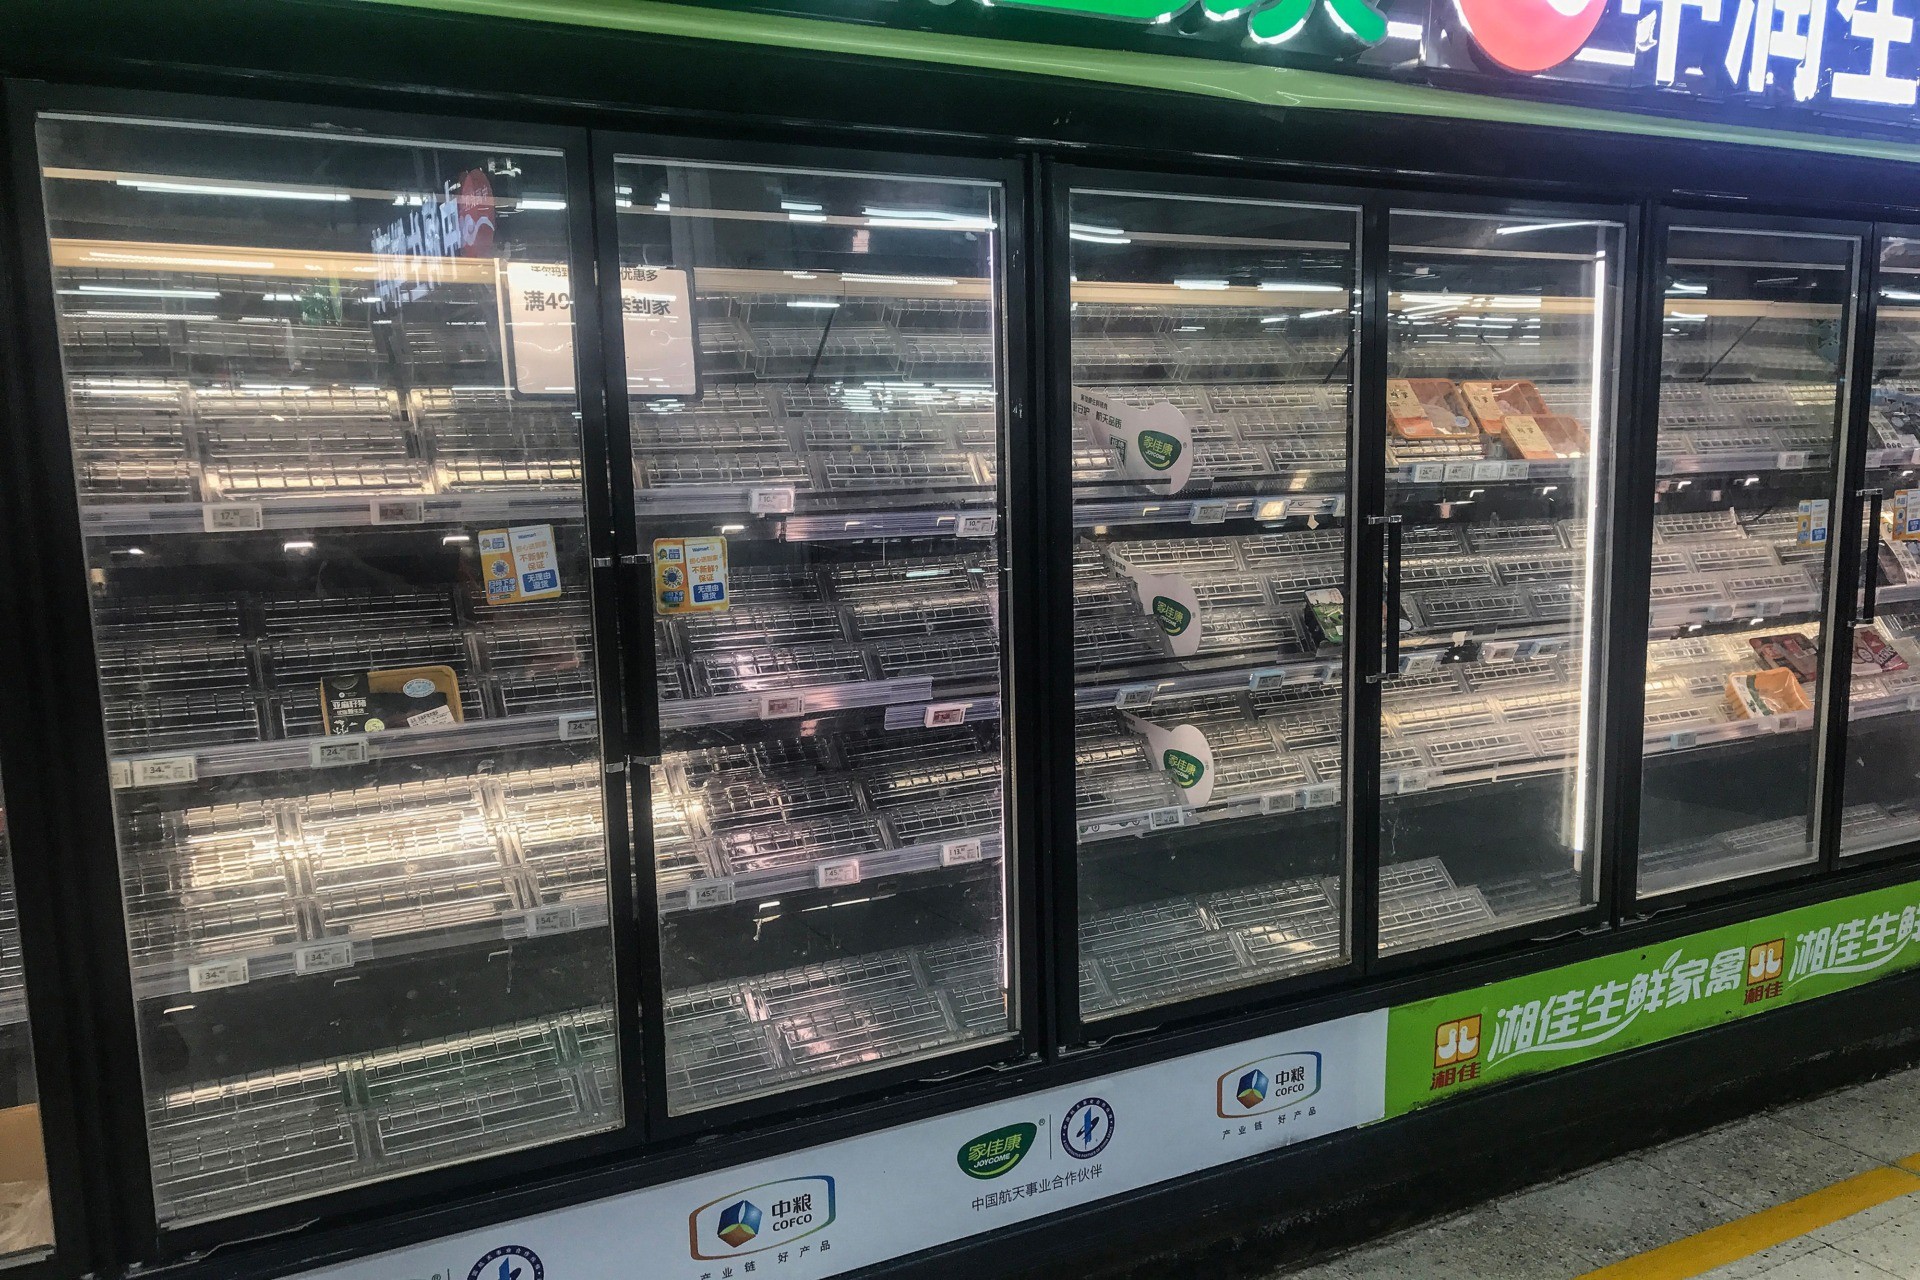 This photo taken on August 2, 2021 shows empty shelves as people buy items at a supermarket in Wuhan, in China's central Hubei province, as authorities said they would test its entire population for Covid-19 after the central Chinese city where the coronavirus emerged reported its first local infections in more than a year. - China OUT (Photo by STR / AFP) / China OUT (Photo by STR/AFP via Getty Images)